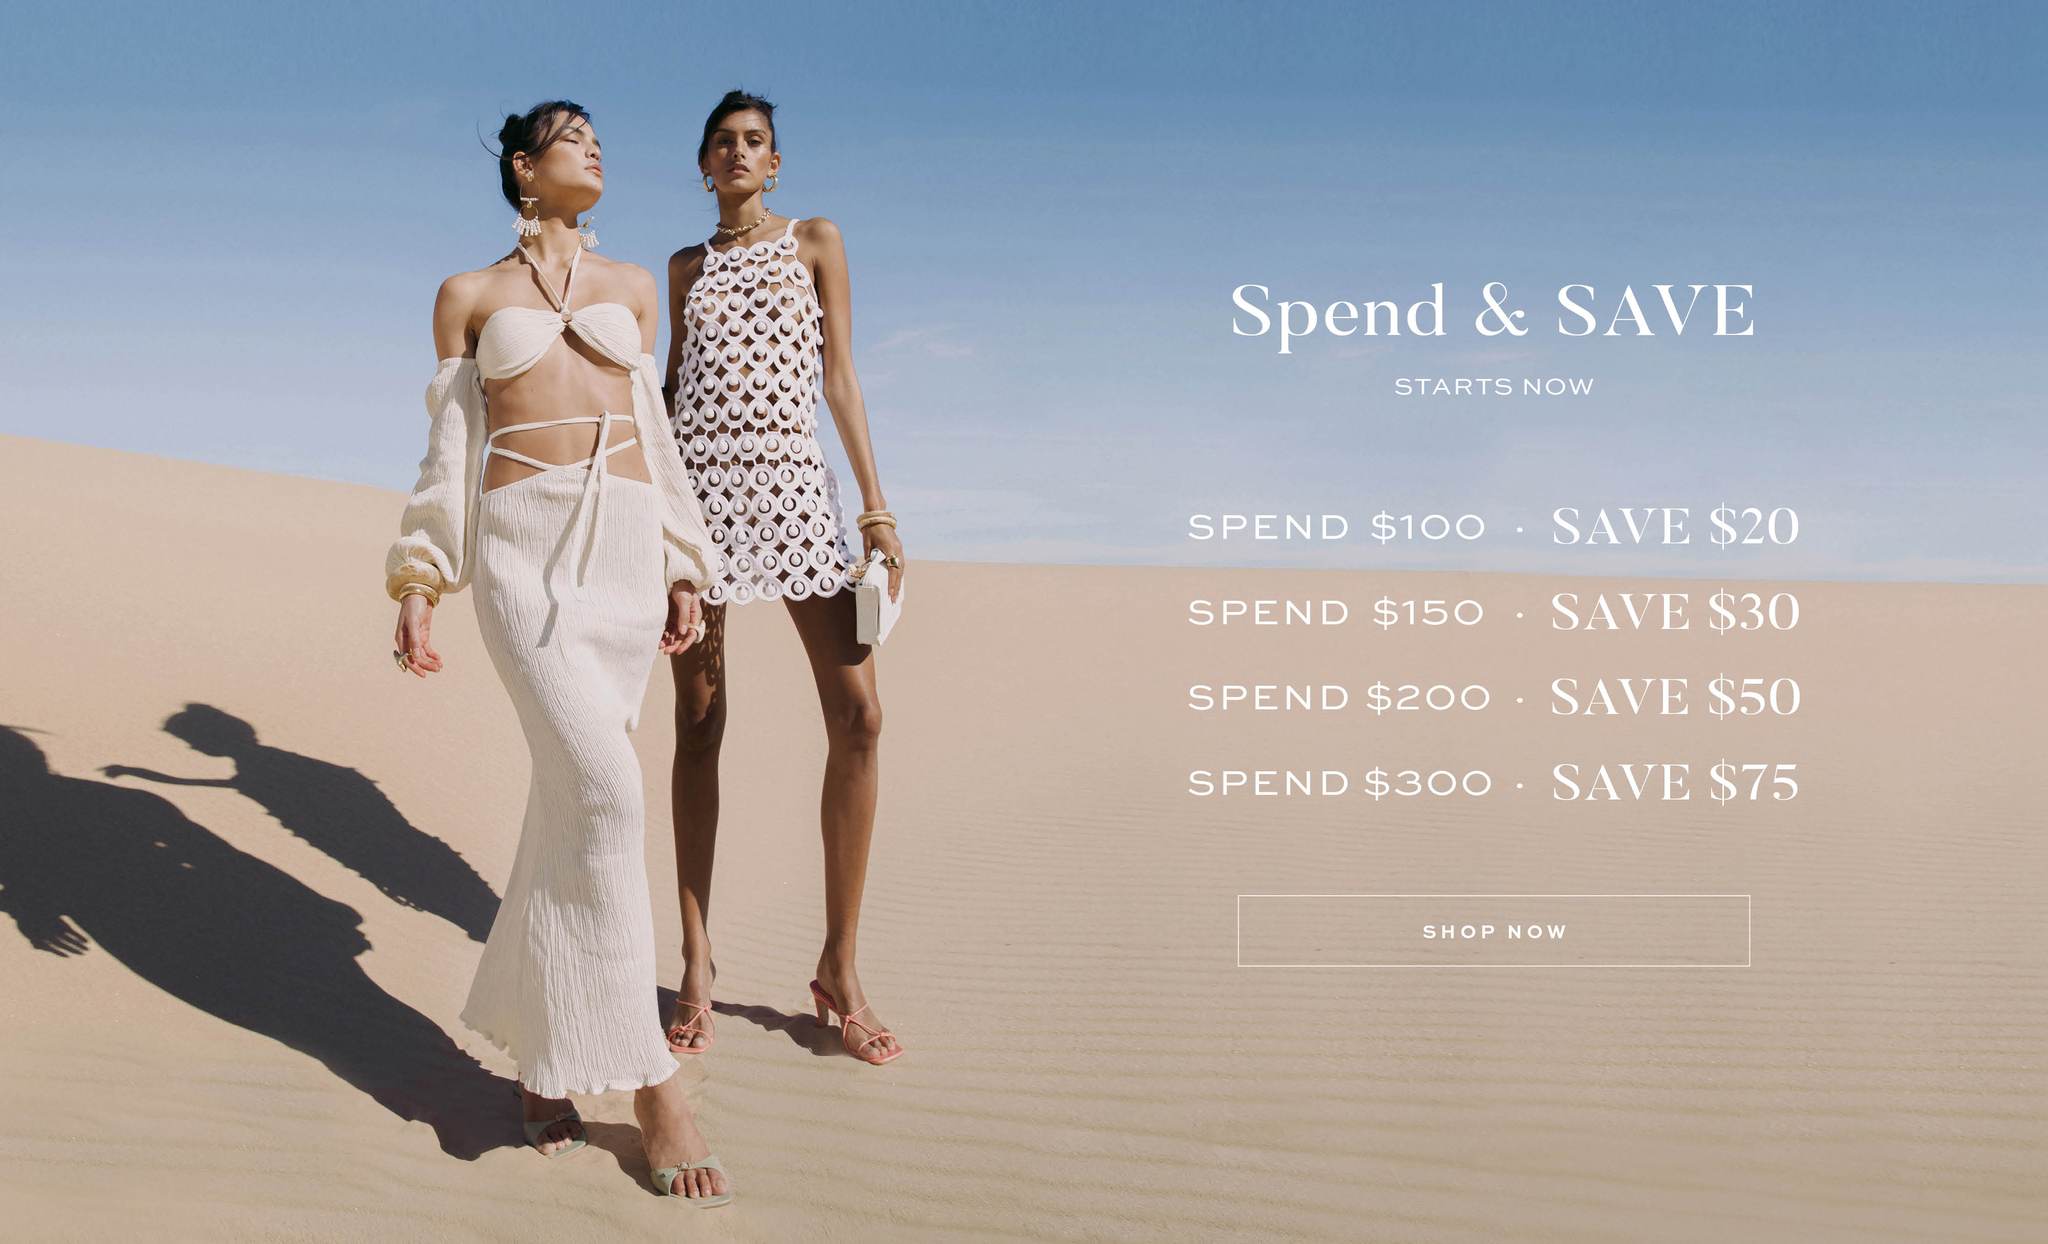 Spend & Save - Save up to $75 OFF